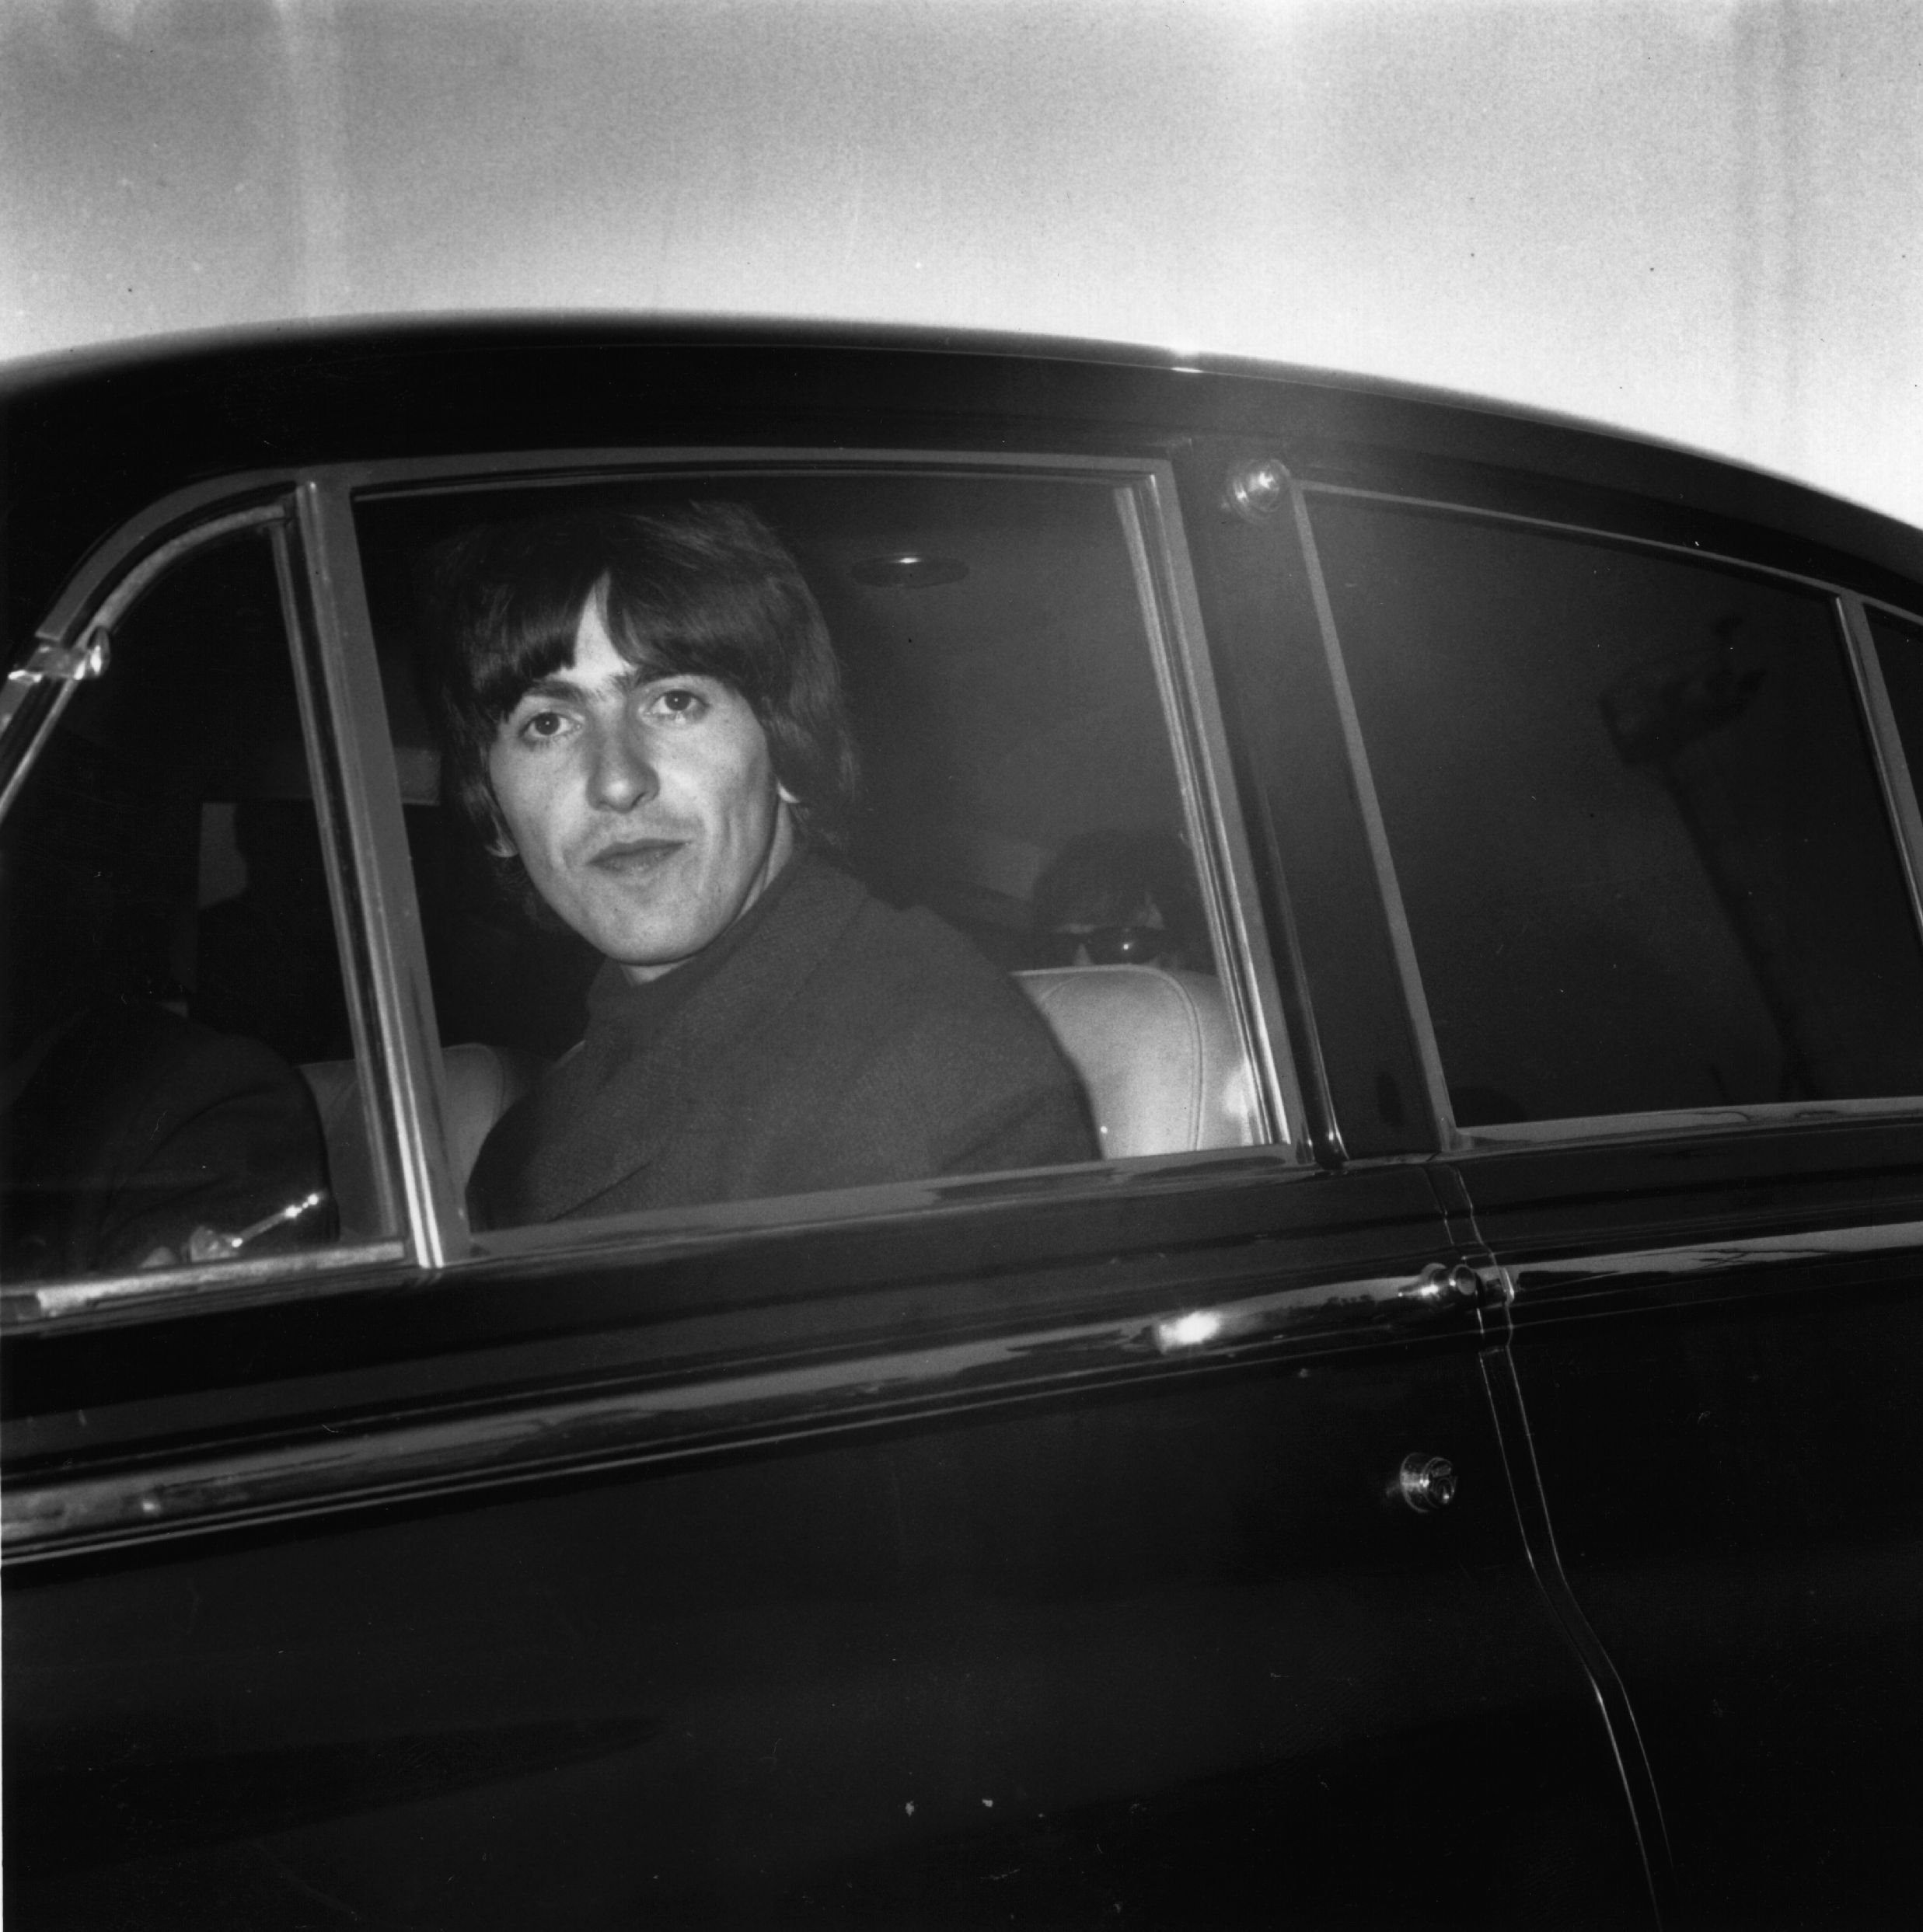 A black and white picture of George Harrison sitting in the back of a car.